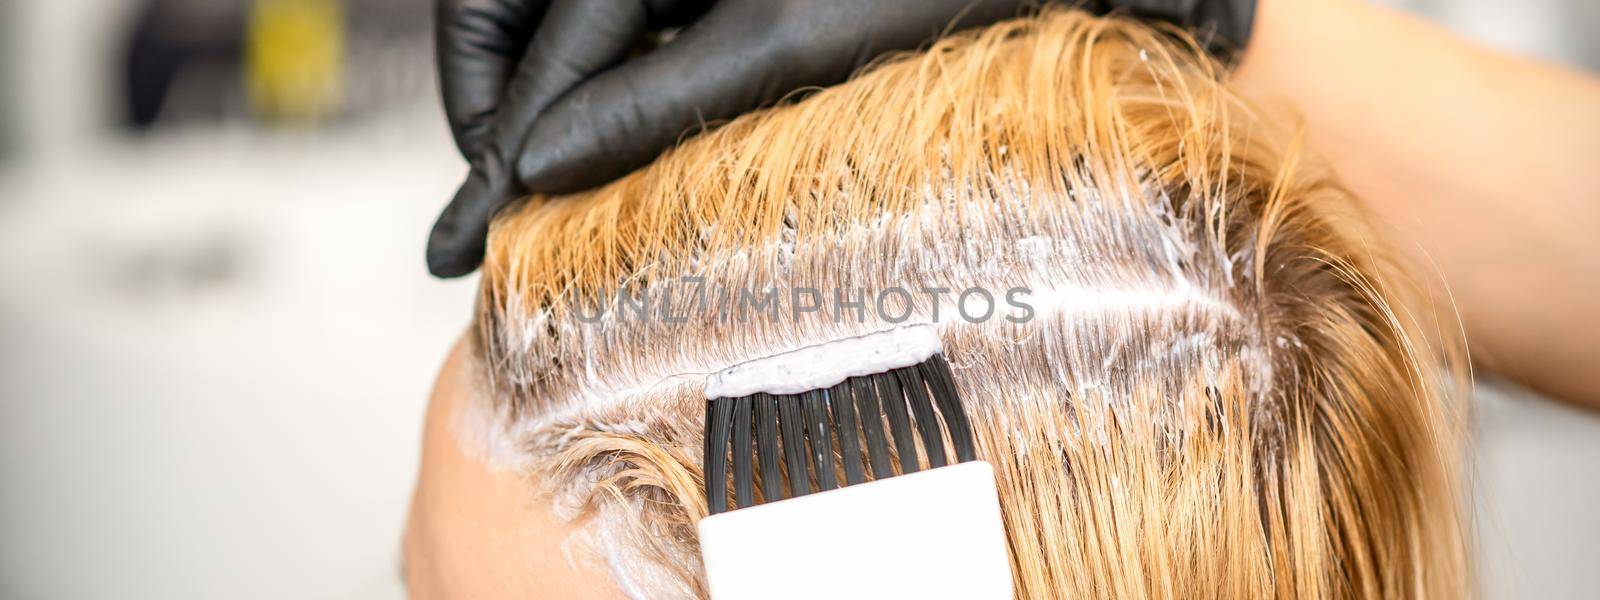 The hairdresser is dyeing blonde hair roots with a brush for a young woman in a hair salon. by okskukuruza